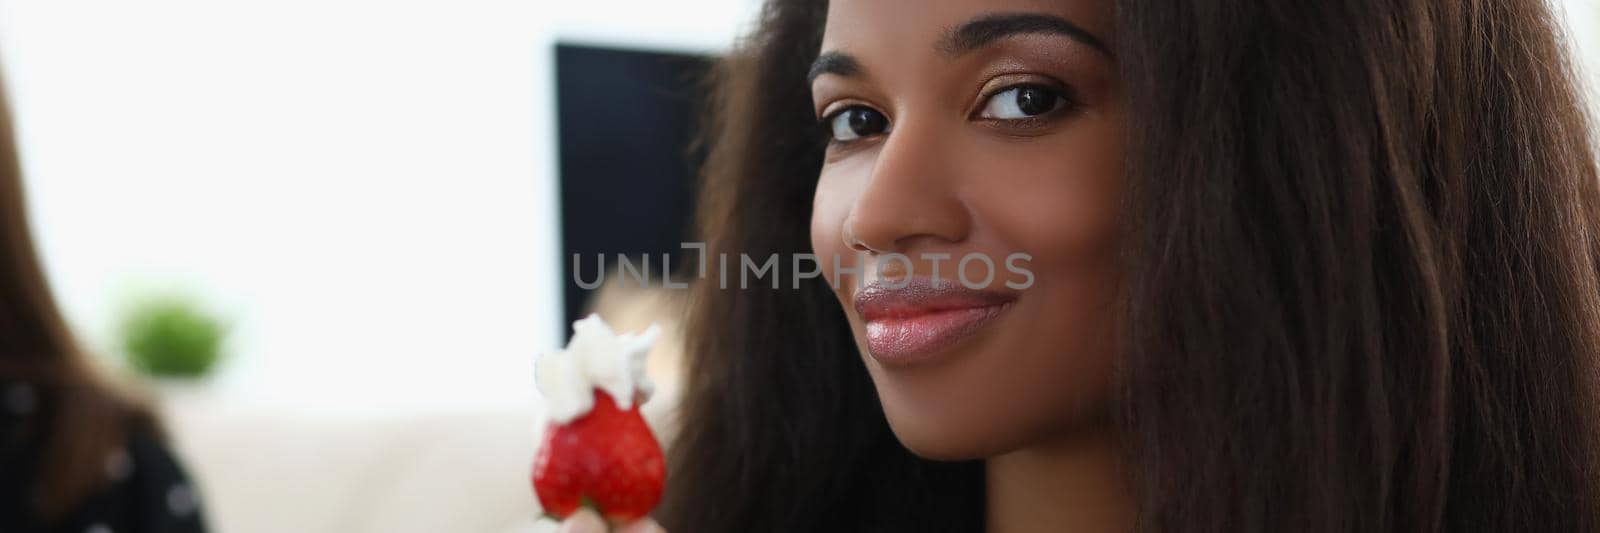 Close-up of latin woman hold fresh strawberry fruit with whipped cream on top. Afro american girl eating berry and smiling. Vitamin, lunch, snack concept